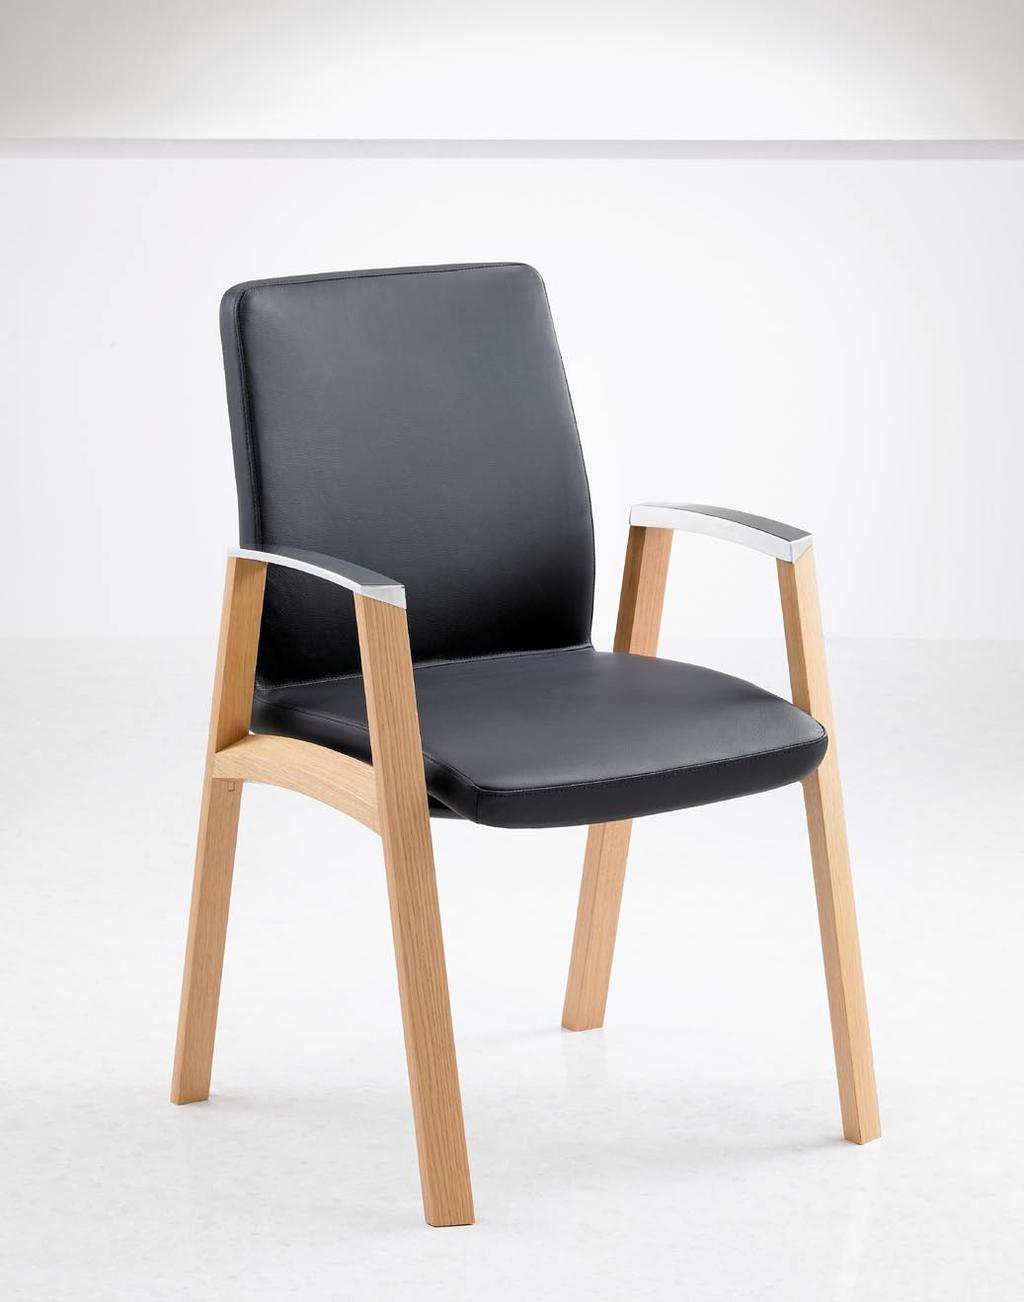 Meeting and Conference Chairs Fulcrum F2 Timber Frame Meeting and conference chairs of exceptional quality and comfort, with hardwood frames in a wide range of timbers and finishes.